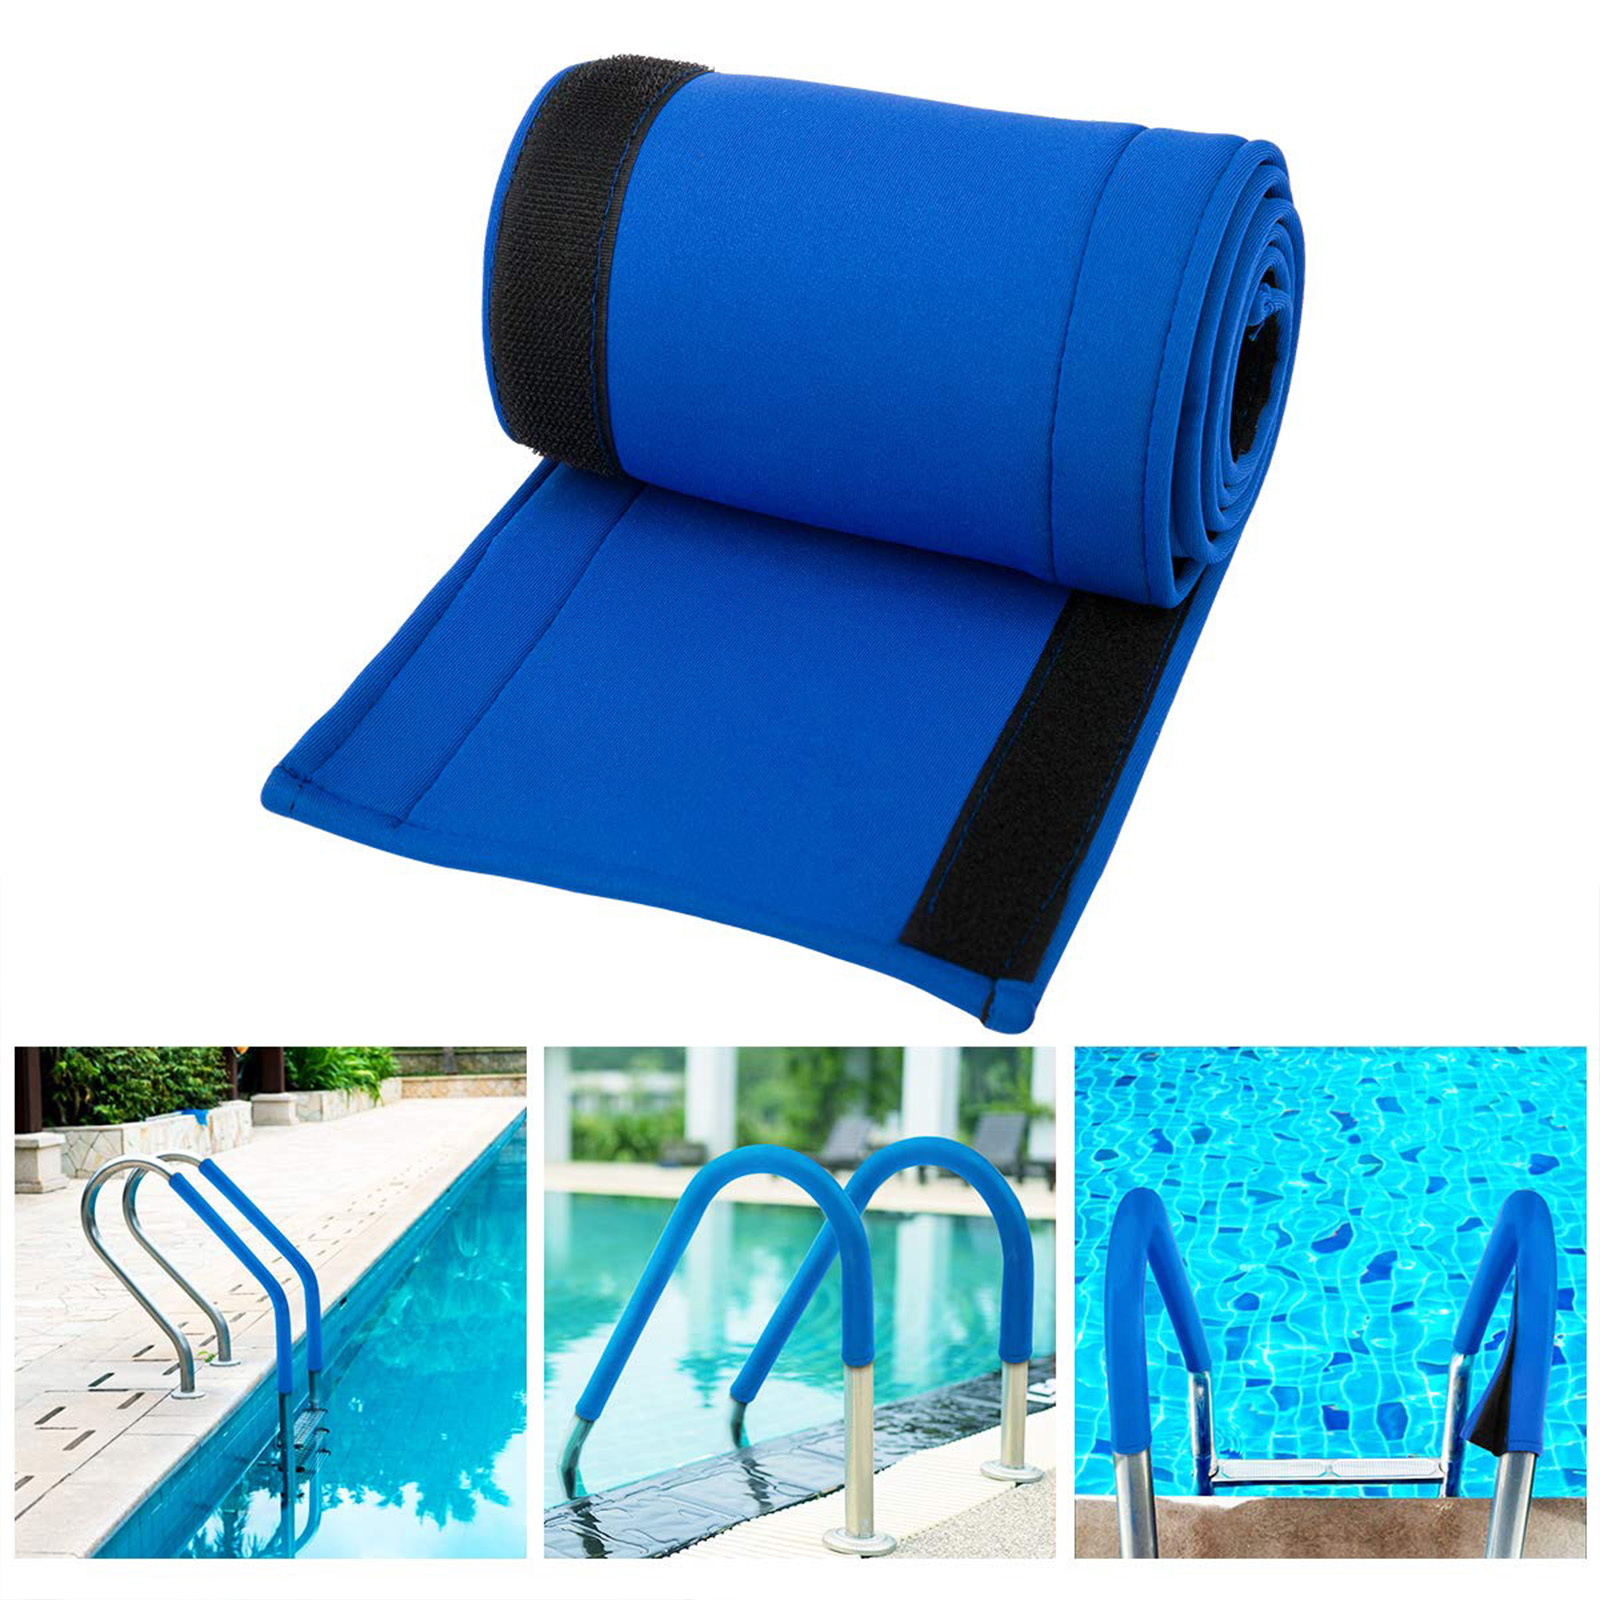 Swimming Pool Handrail Cover Safety Ladder Soft Blue Grip Protector (8ft) от Cesdeals WW